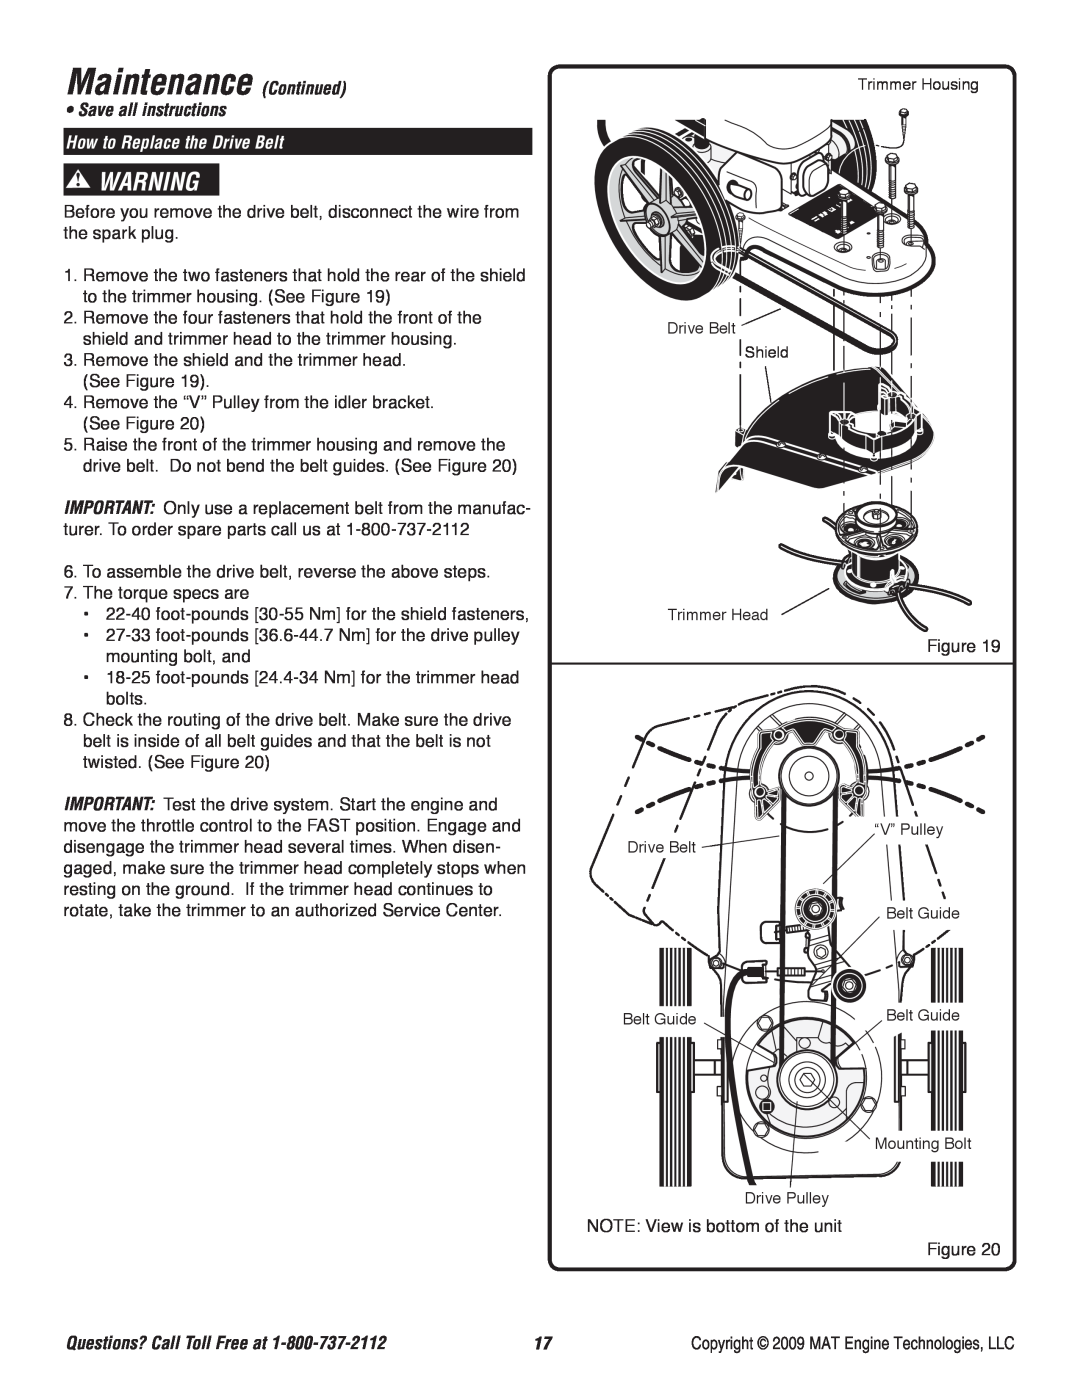 Powermate P-WFT-16022 Maintenance Continued, Save all instructions, How to Replace the Drive Belt, “V” Pulley, Belt Guide 